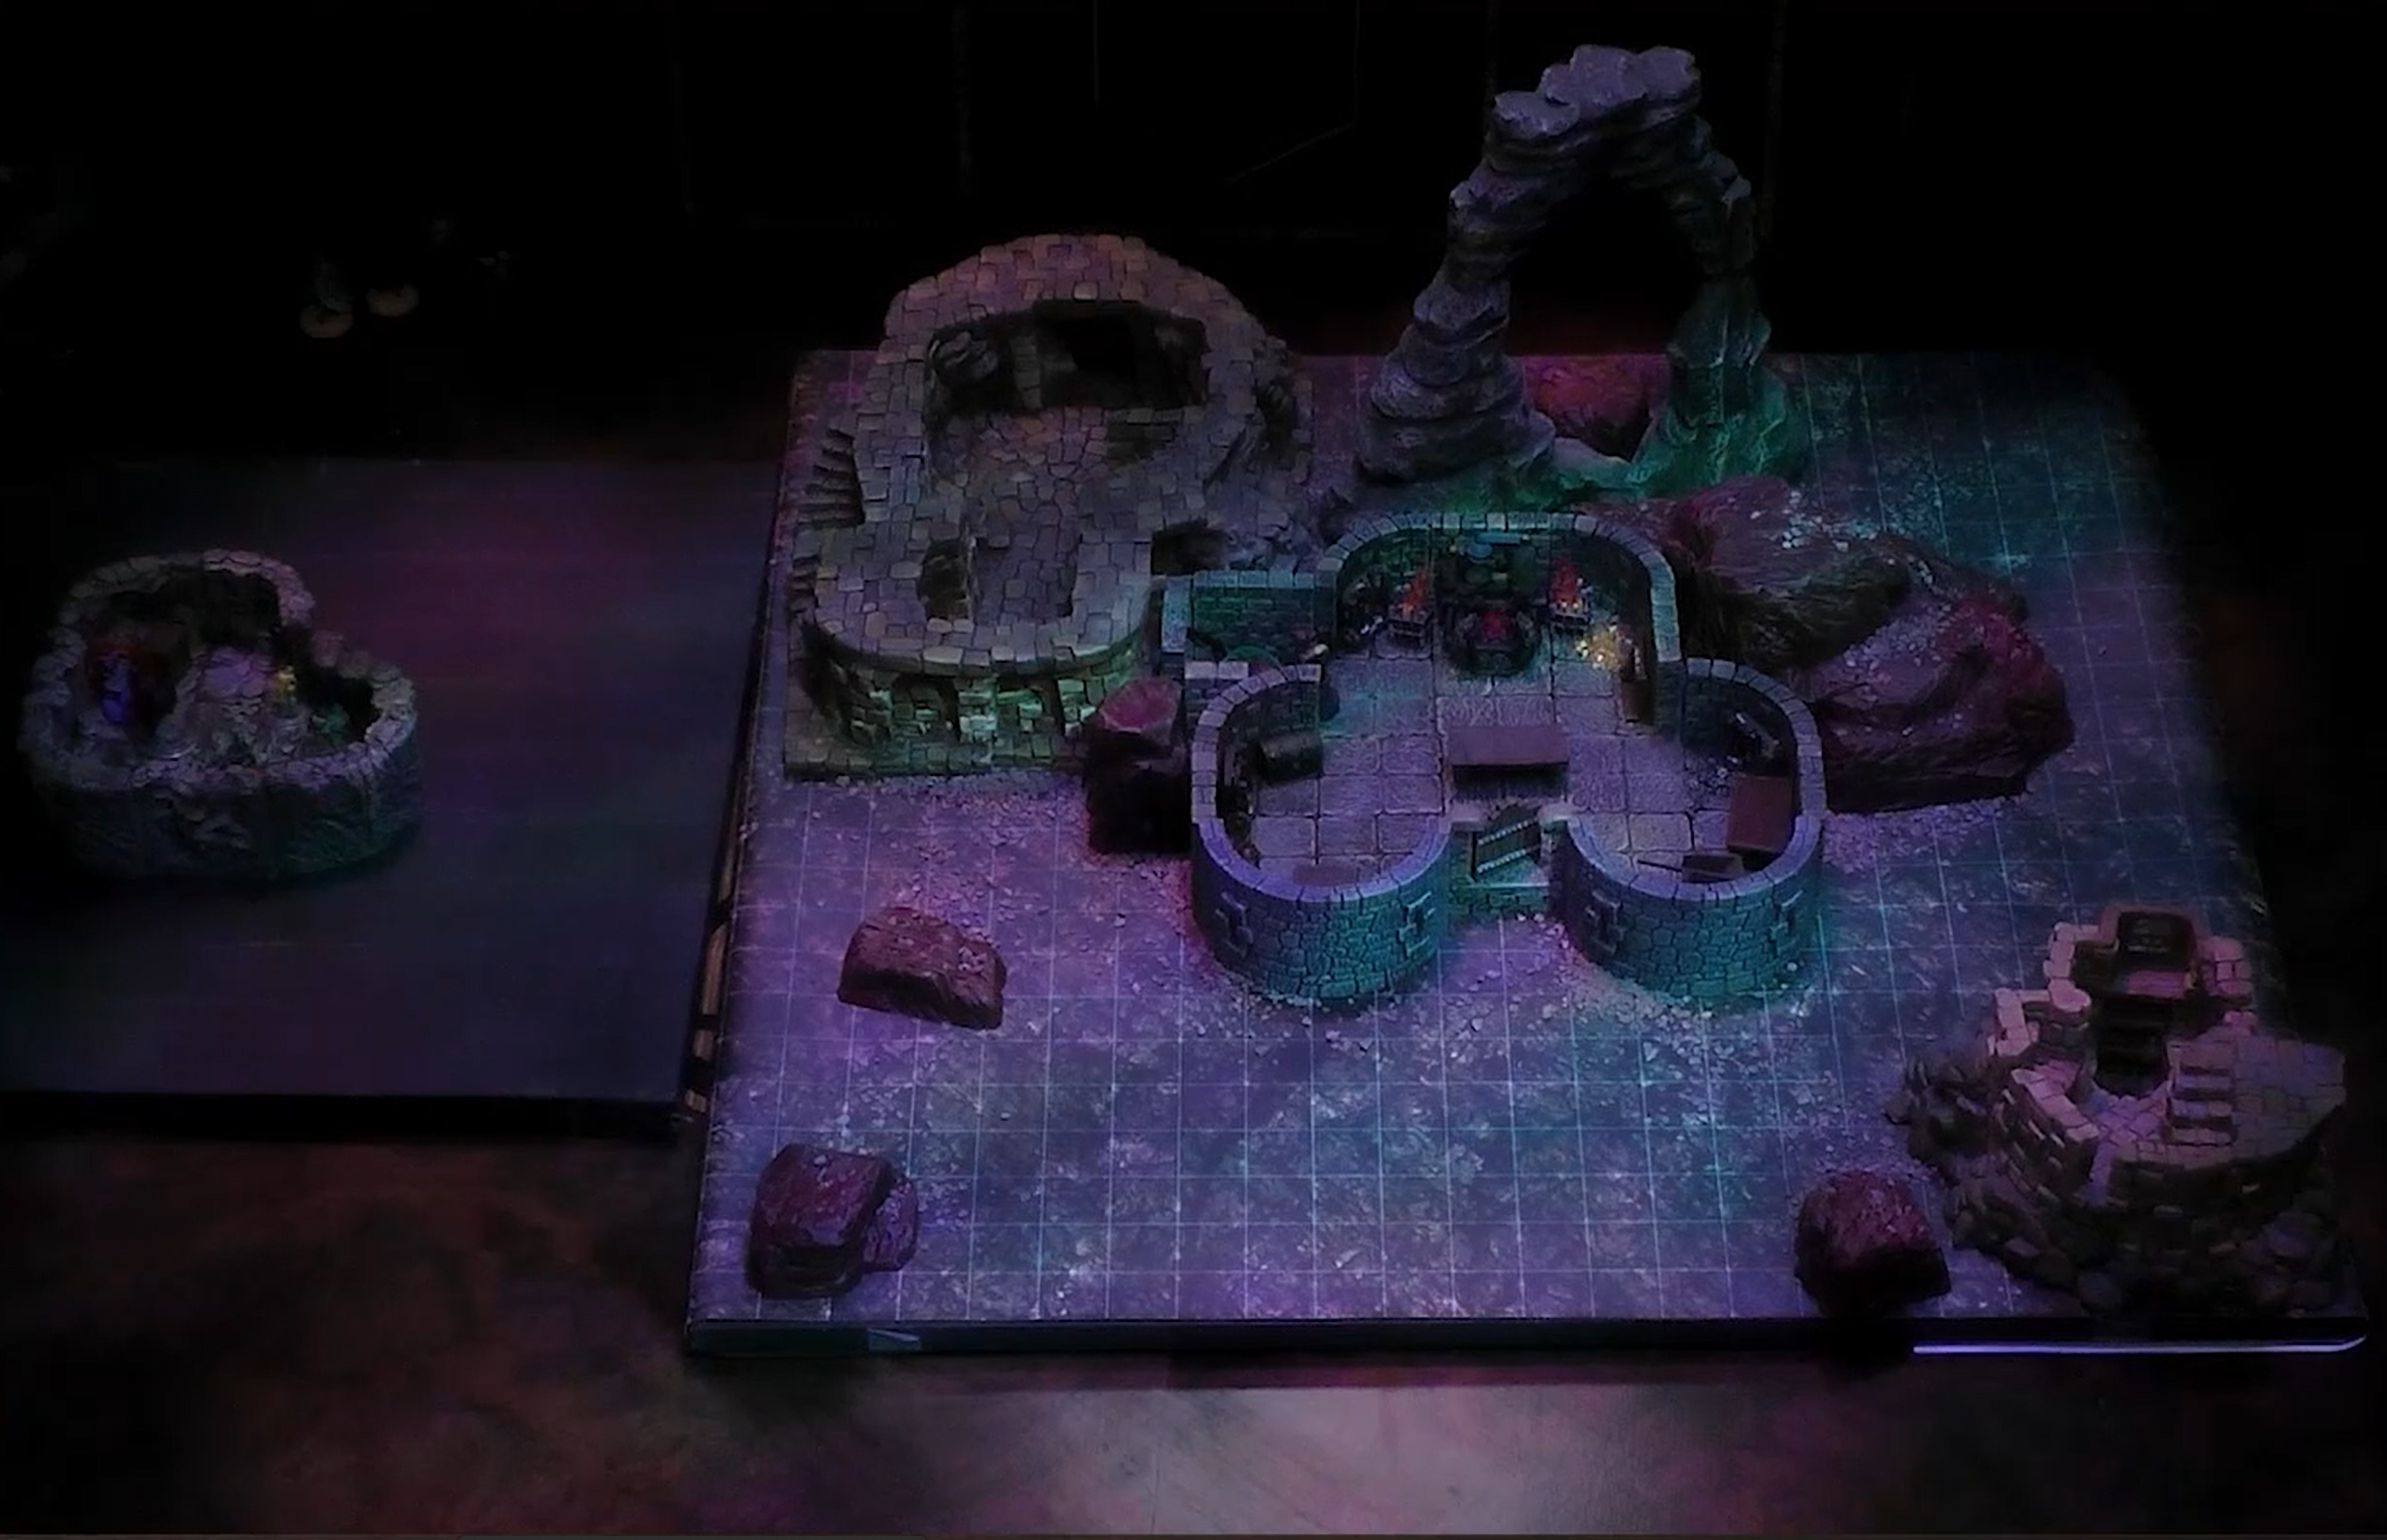 A battlemap of a stone building containing a forge. Another room with more haphazard stonework that doesn’t seem connected is off to the side. A stone archway is also near the building. A small stone basement is placed off the battlemap some distance away.